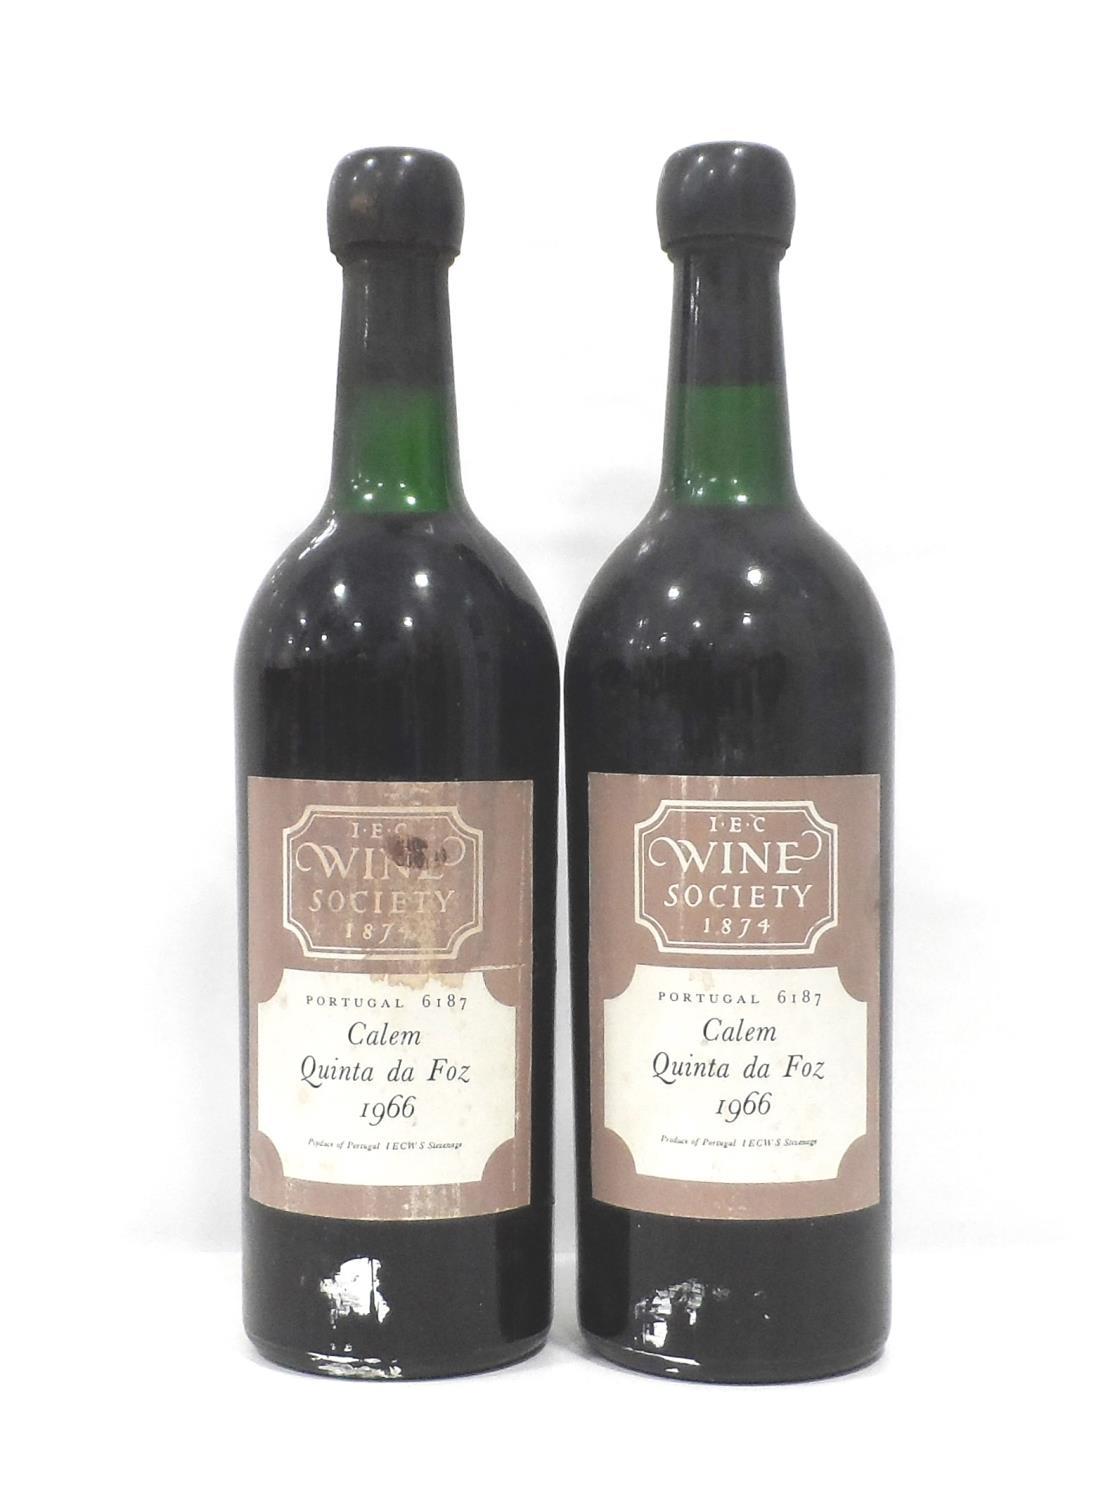 CALEM QUINTA DA FOZ 1966 VINTAGE PORT Bottled for and Shipped by the The Wine Society, a pair of